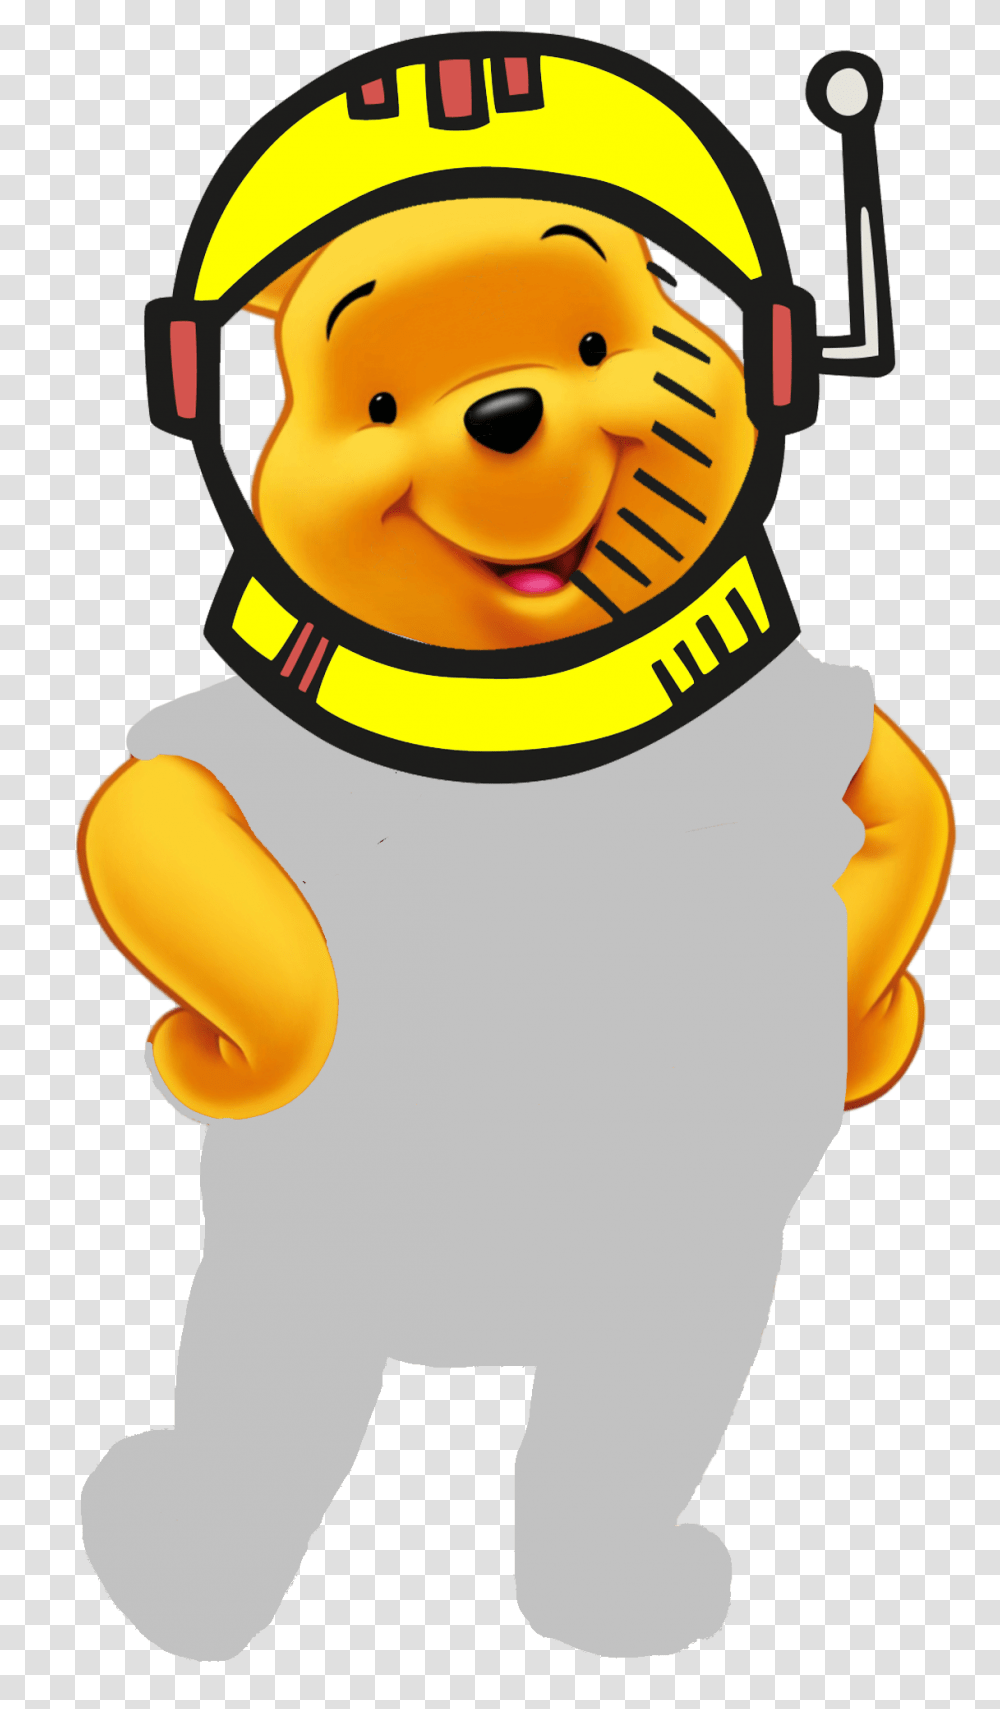 Astronaut Pooh Astronaut Iphone Wallpaper Pikachu Winnie The Pooh, Person, Mascot, Food, Costume Transparent Png